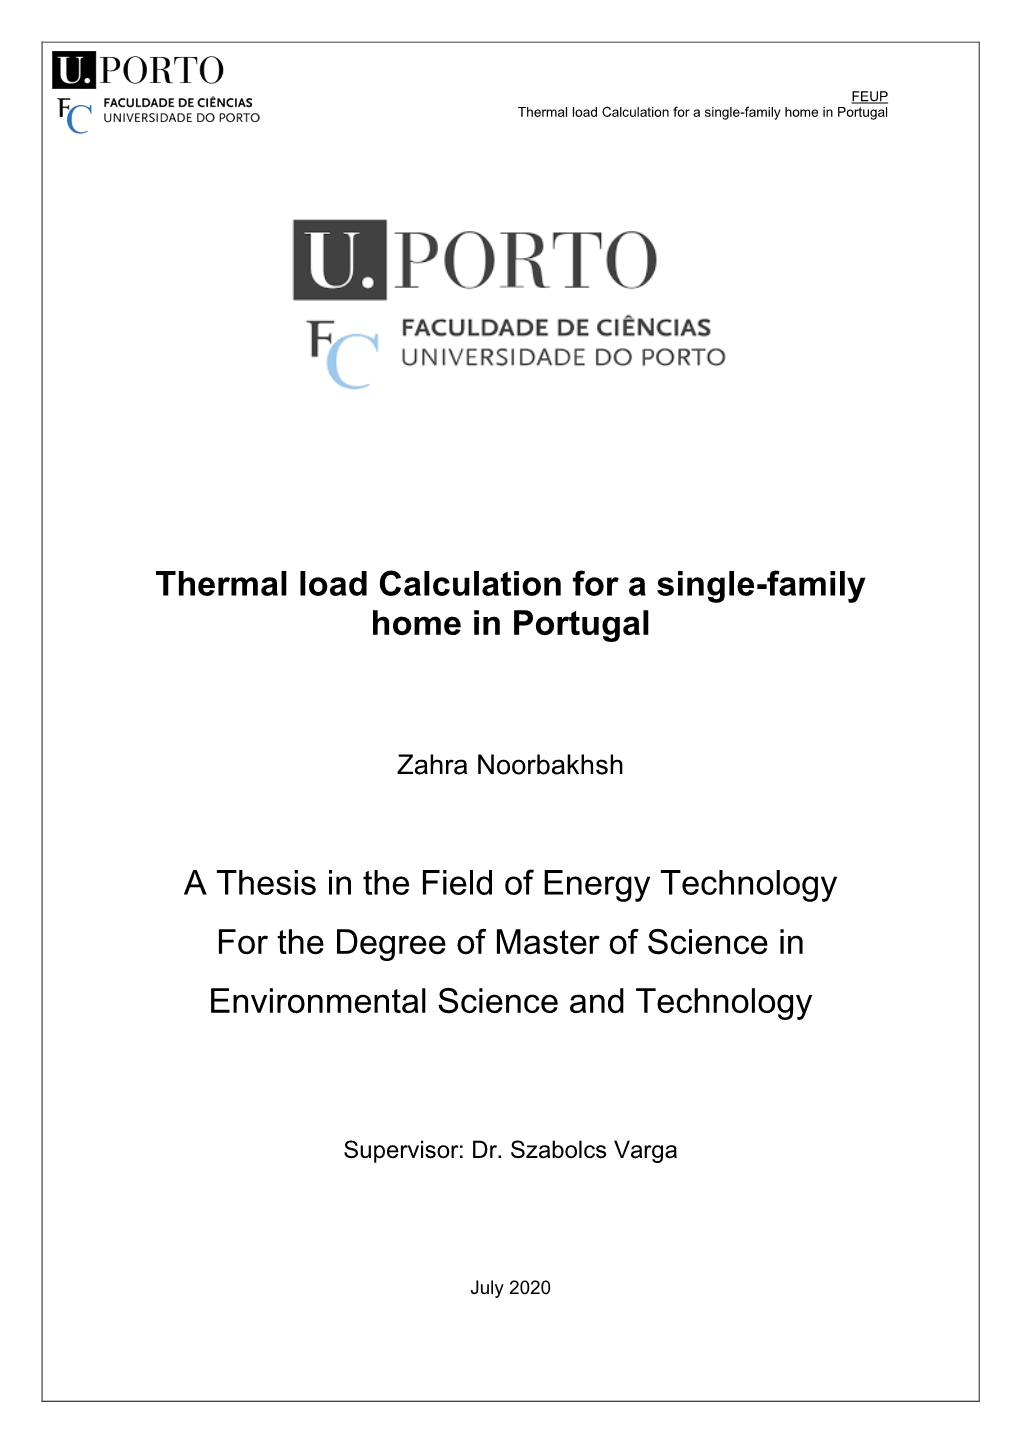 Thermal Load Calculation for a Single-Family Home in Portugal